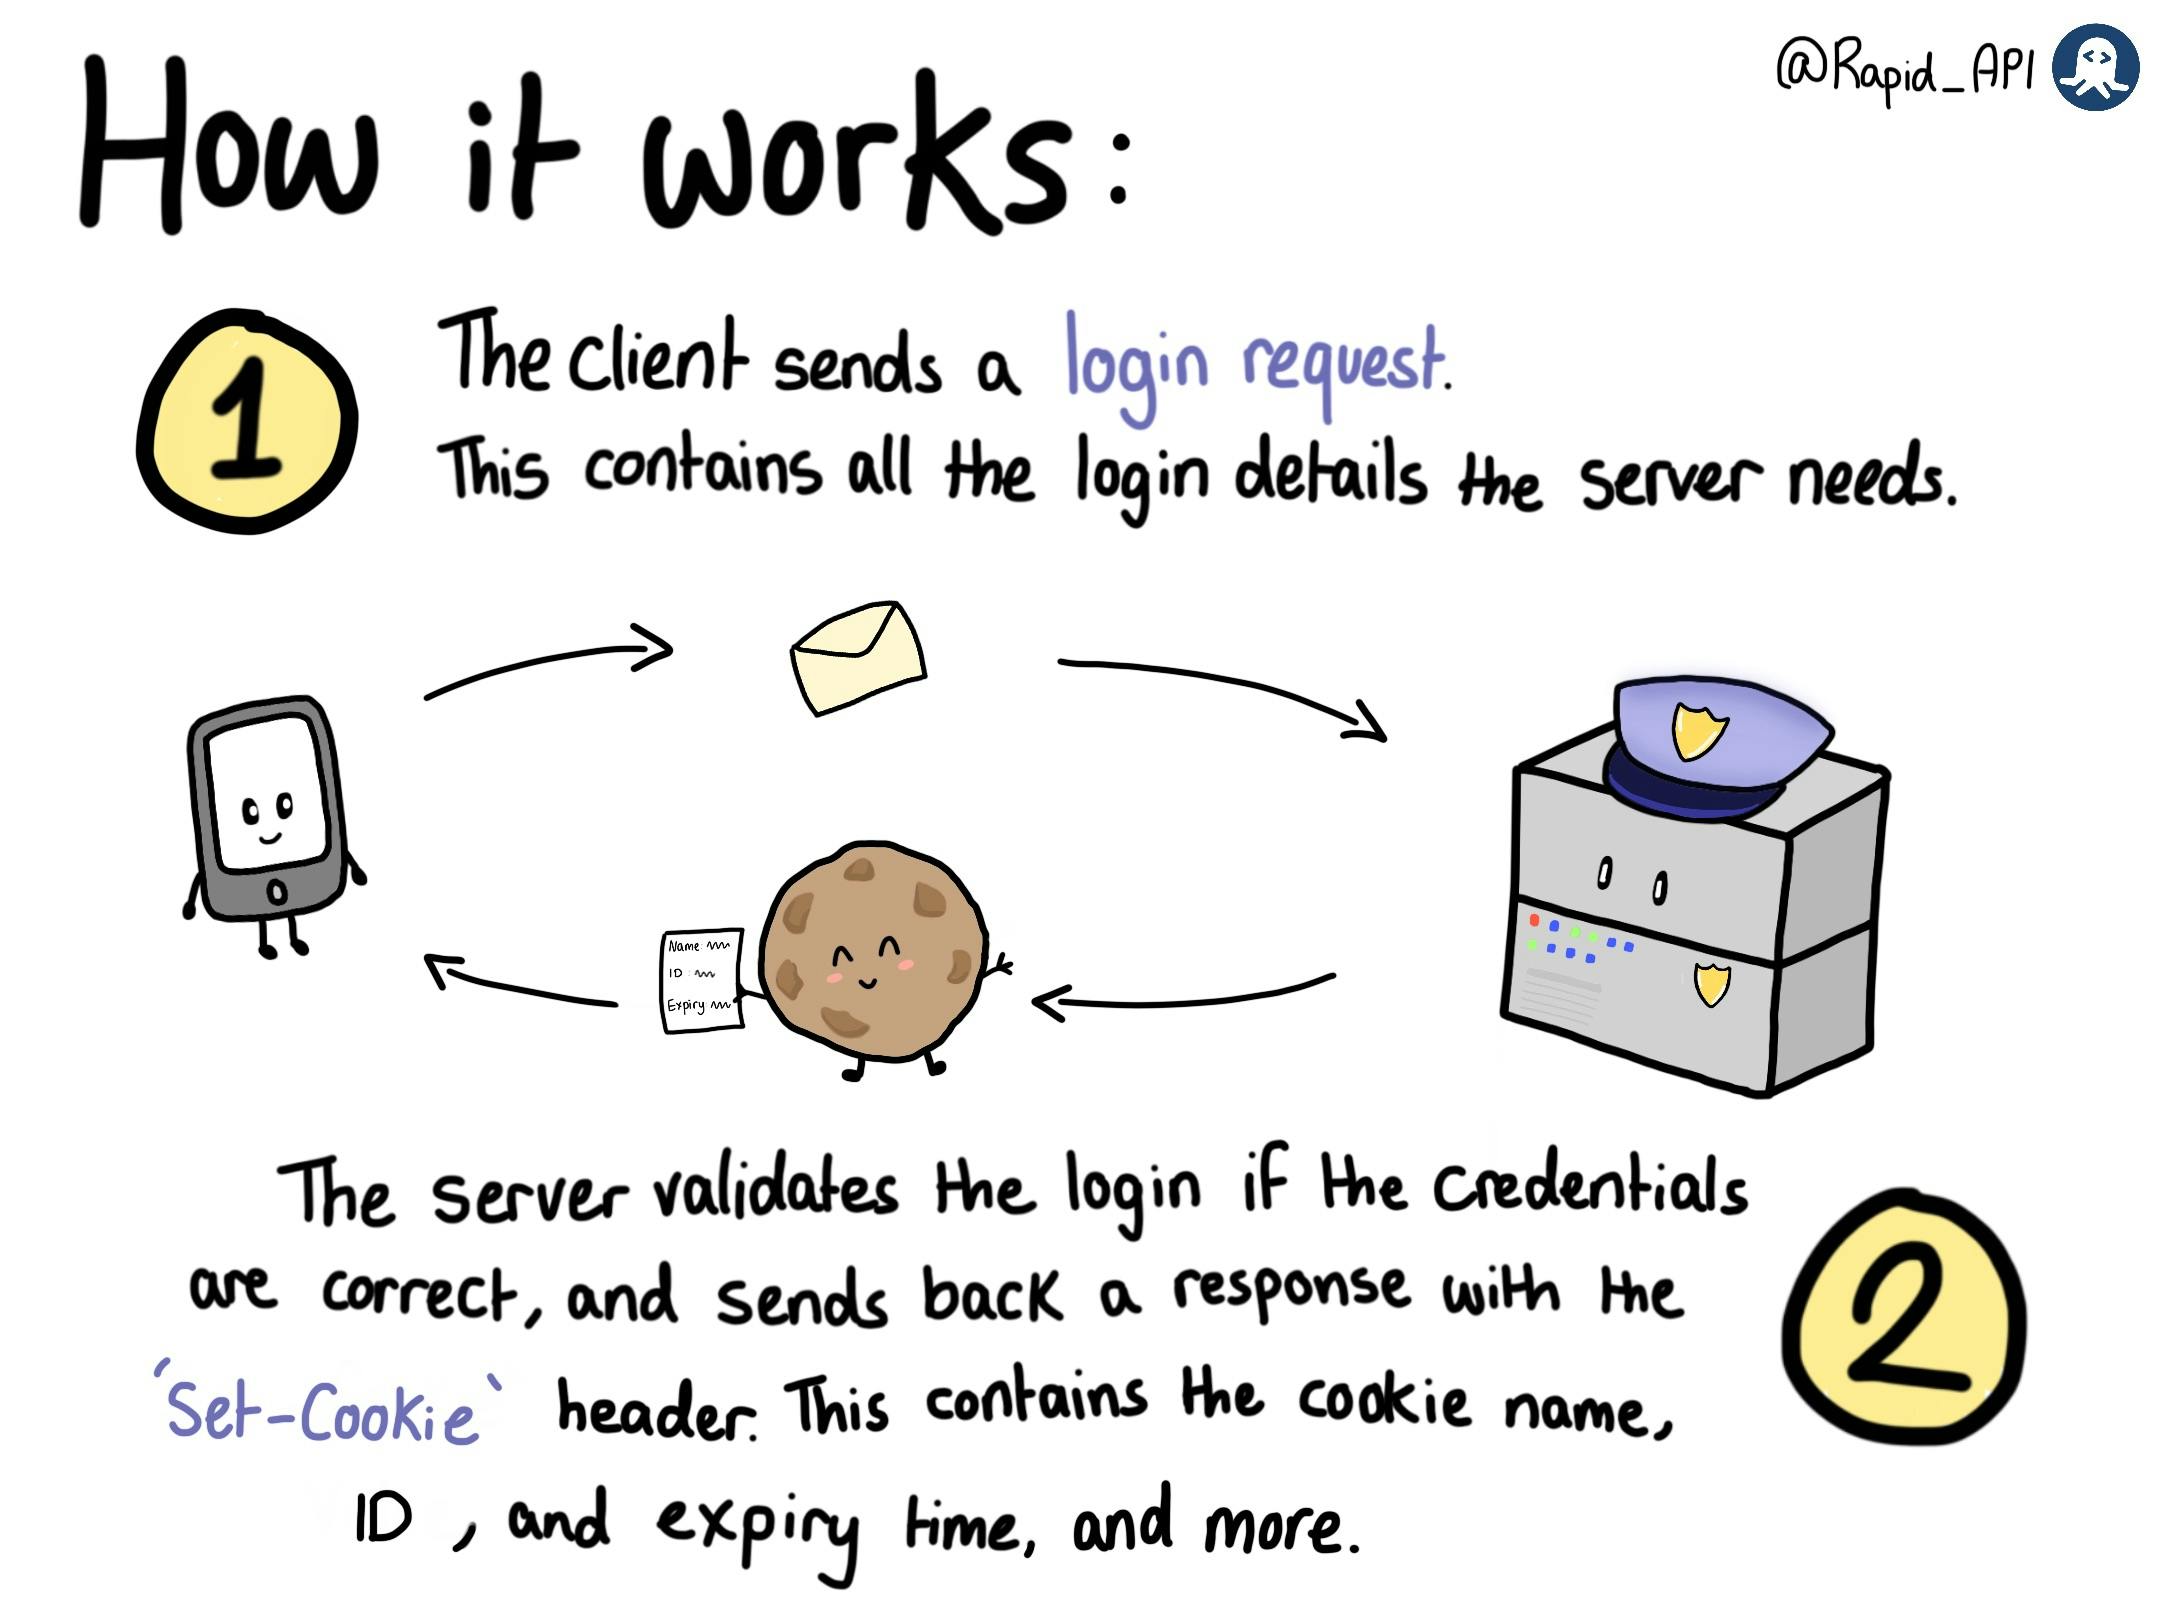 Cookie Authentication